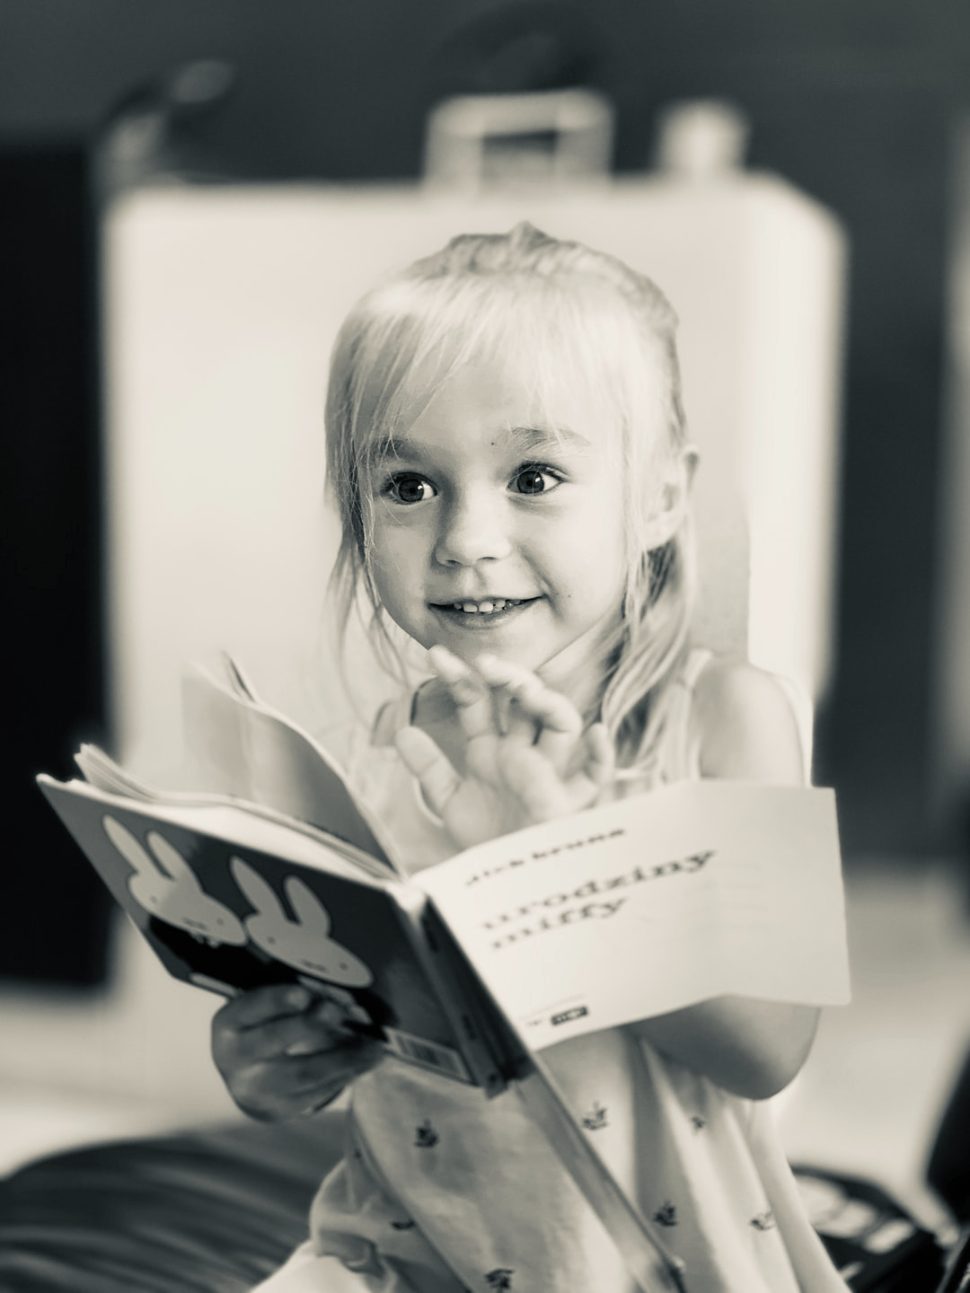 A young girl happy to be reading because she understands basic concepts in the book.